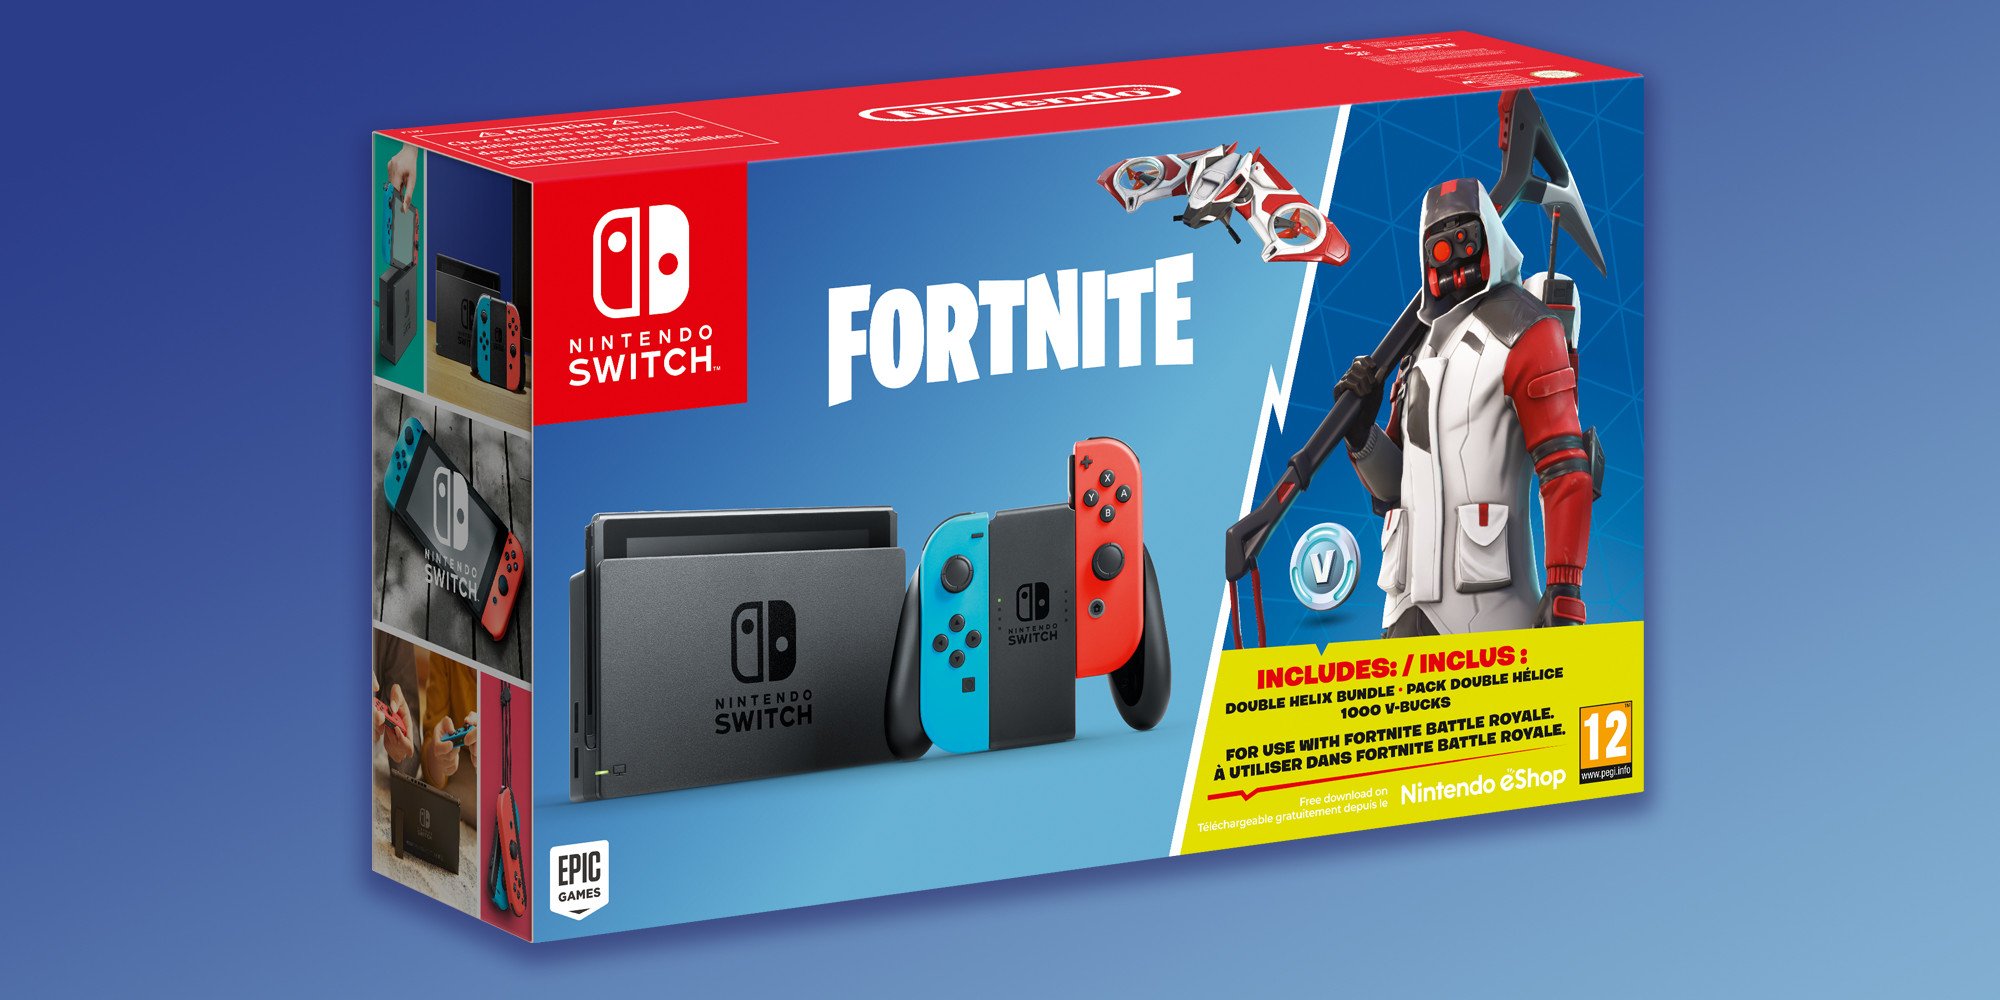 Fitness Hold op krater Nintendo UK on Twitter: "Bundle royale! A #NintendoSwitch #Fortnite bundle  featuring special in-game items and 1,000 V-Bucks will rocket into stores  on October 5th! https://t.co/p0CKLA7PTP" / Twitter